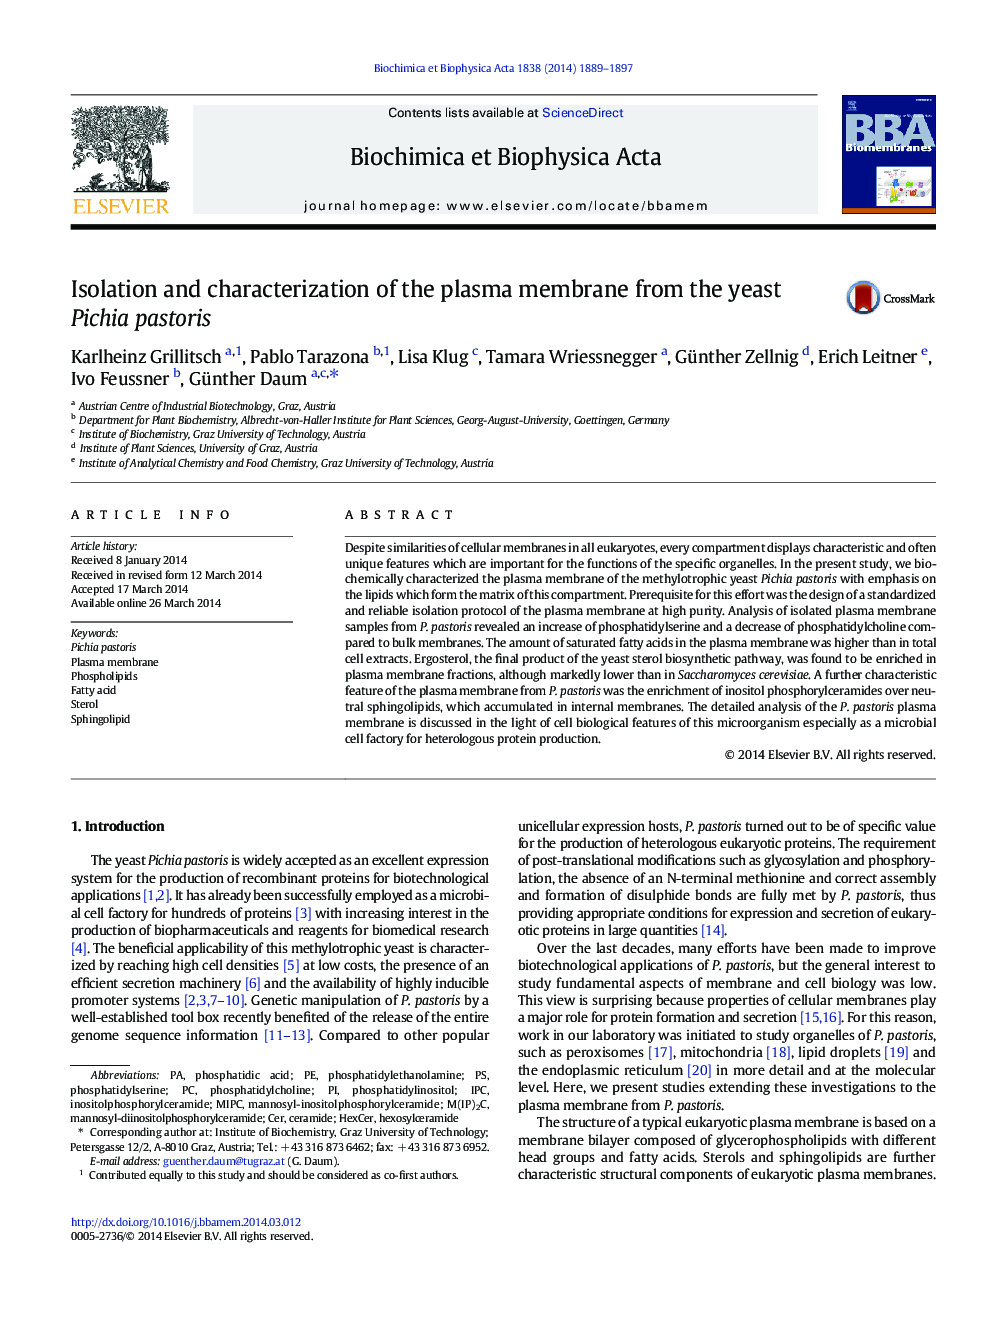 Isolation and characterization of the plasma membrane from the yeast Pichia pastoris